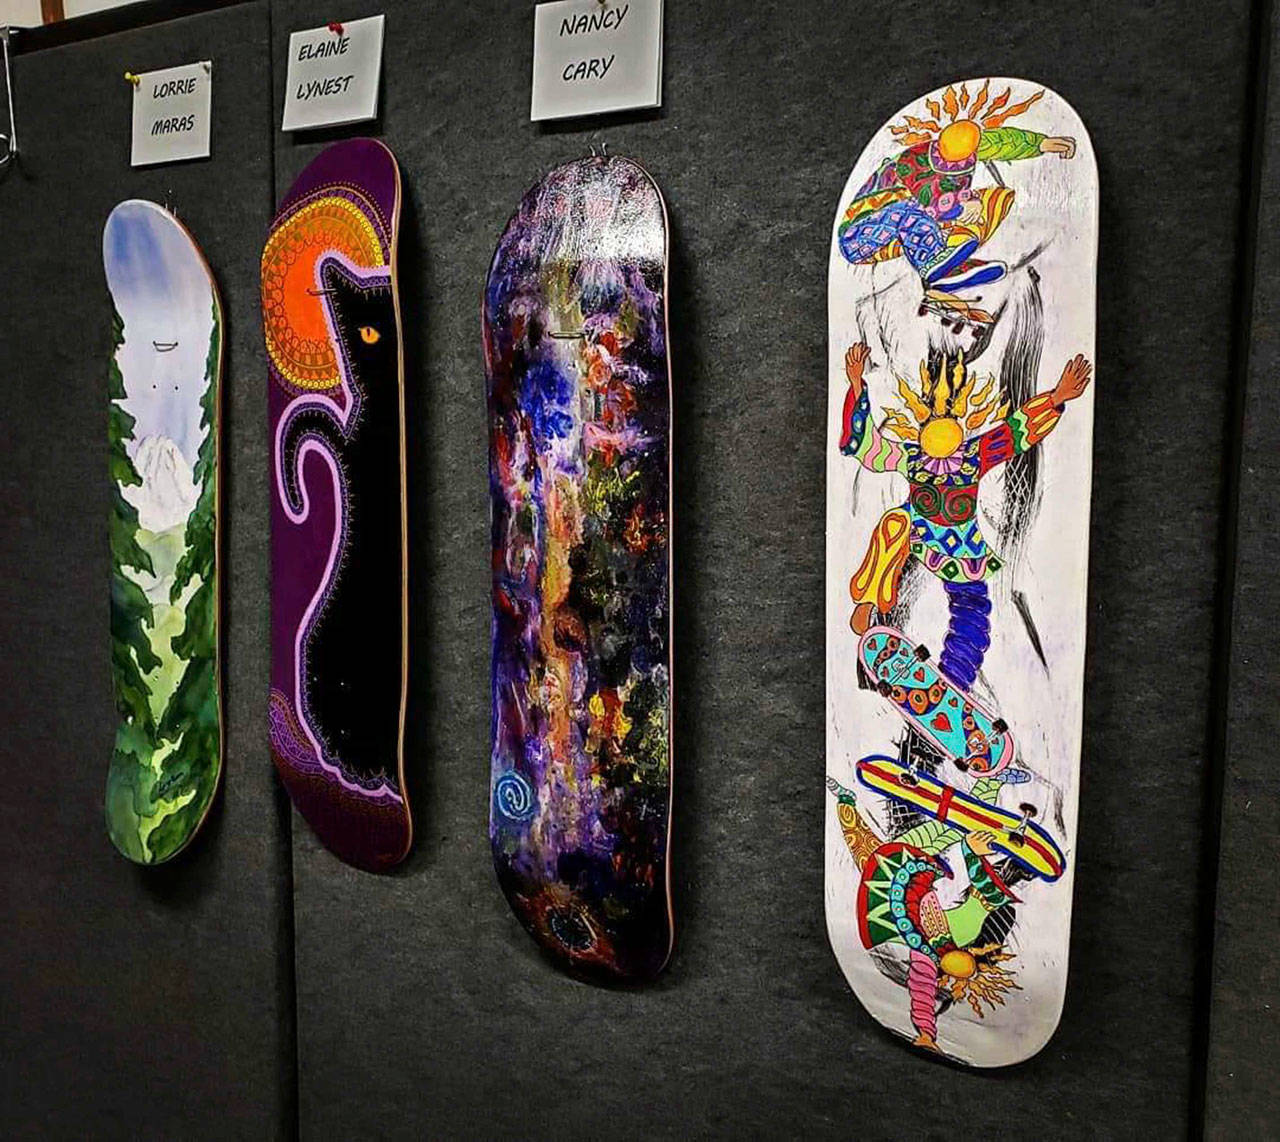 At the last Freestyle event, artists of varying experience levels painted their own skateboards. This time around, they will be decorating musical instruments. Contributed photo